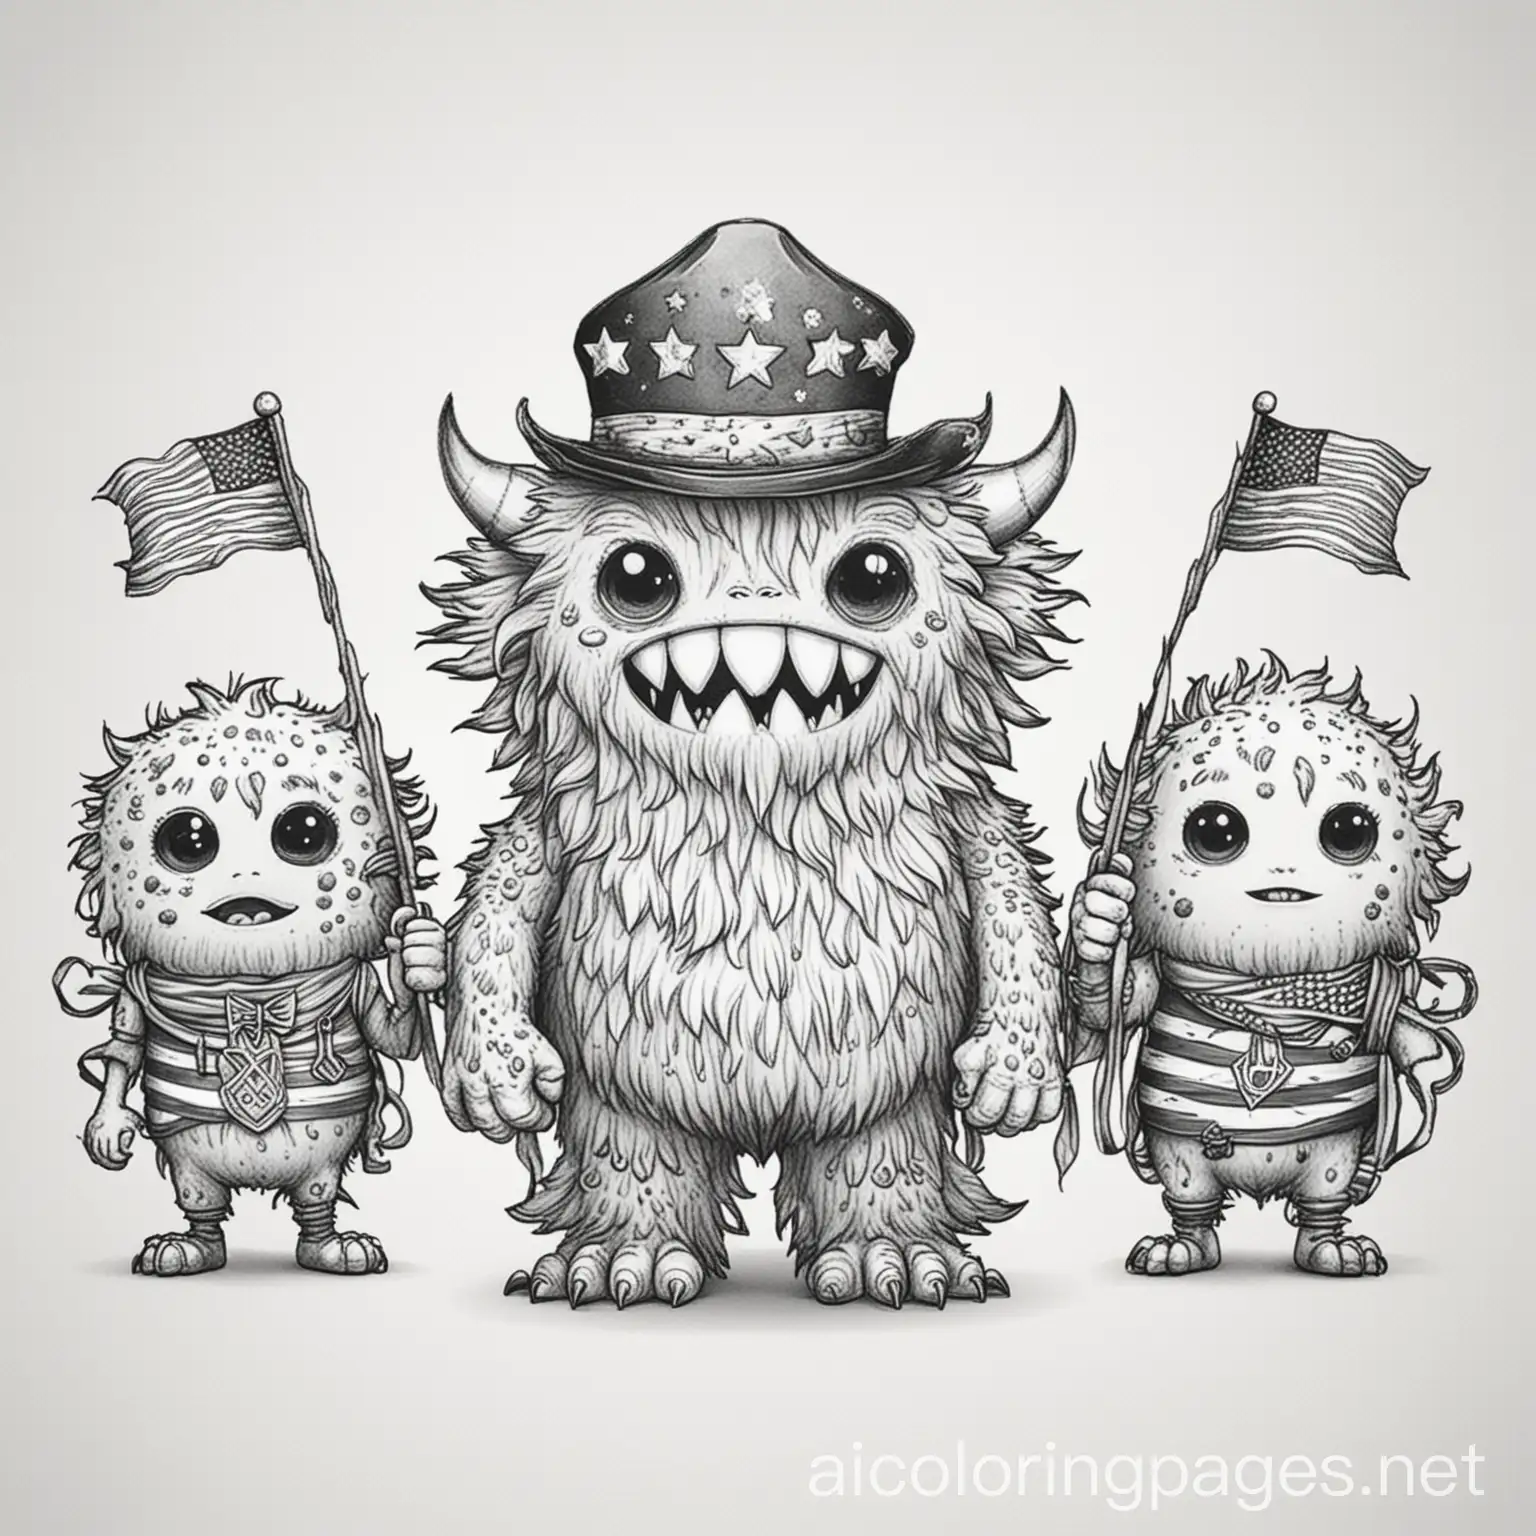 patriotic cute monsters independence day, Coloring Page, black and white, line art, white background, Simplicity, Ample White Space. The background of the coloring page is plain white to make it easy for young children to color within the lines. The outlines of all the subjects are easy to distinguish, making it simple for kids to color without too much difficulty